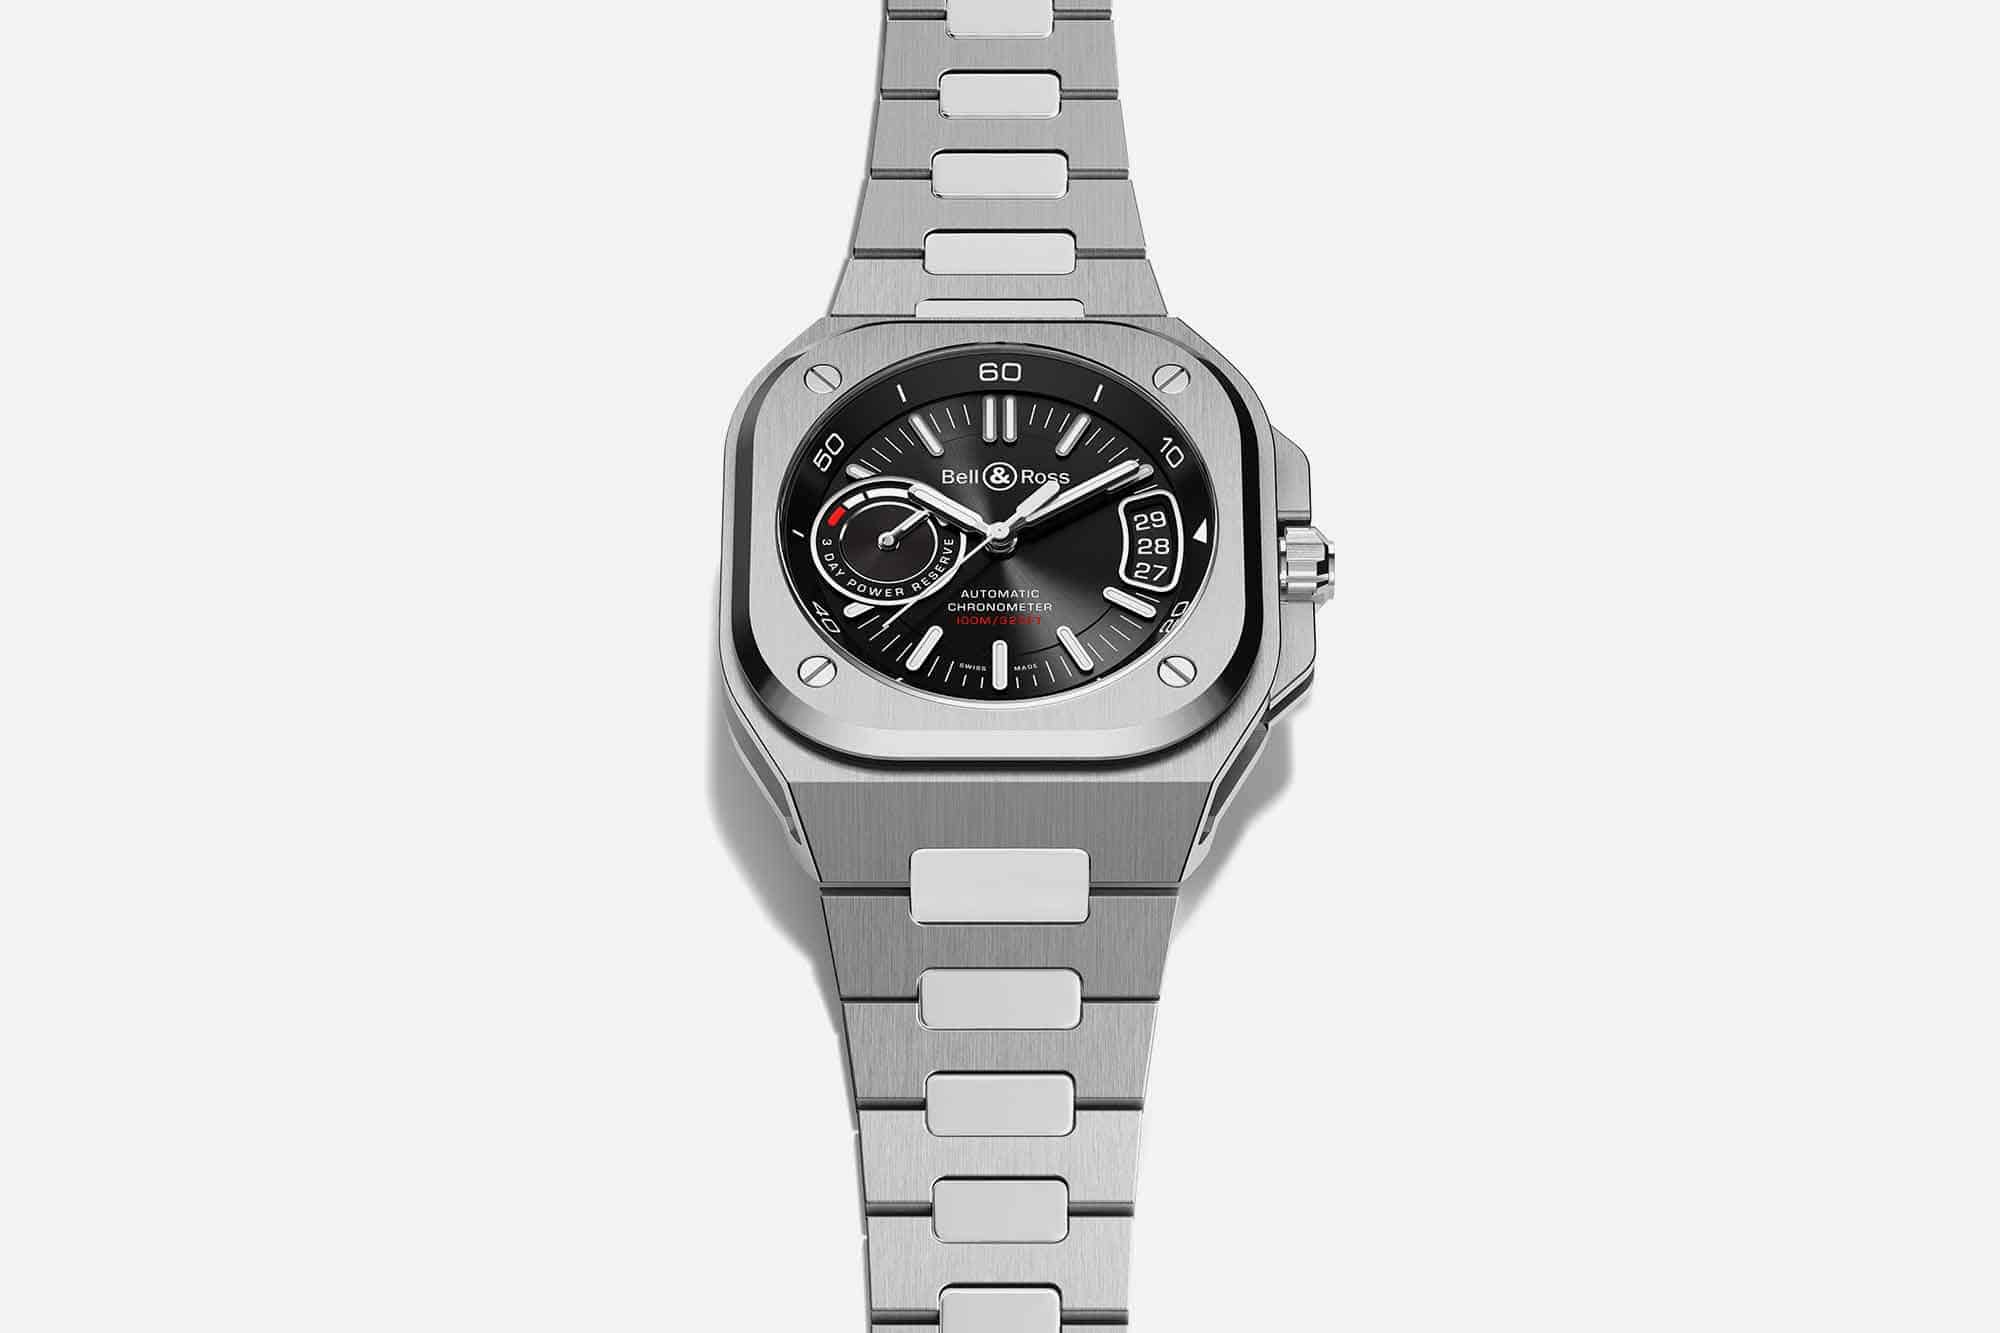 Bell & Ross Introduces the BR-X5, their Latest Sports Watch on the BR 05 Platform